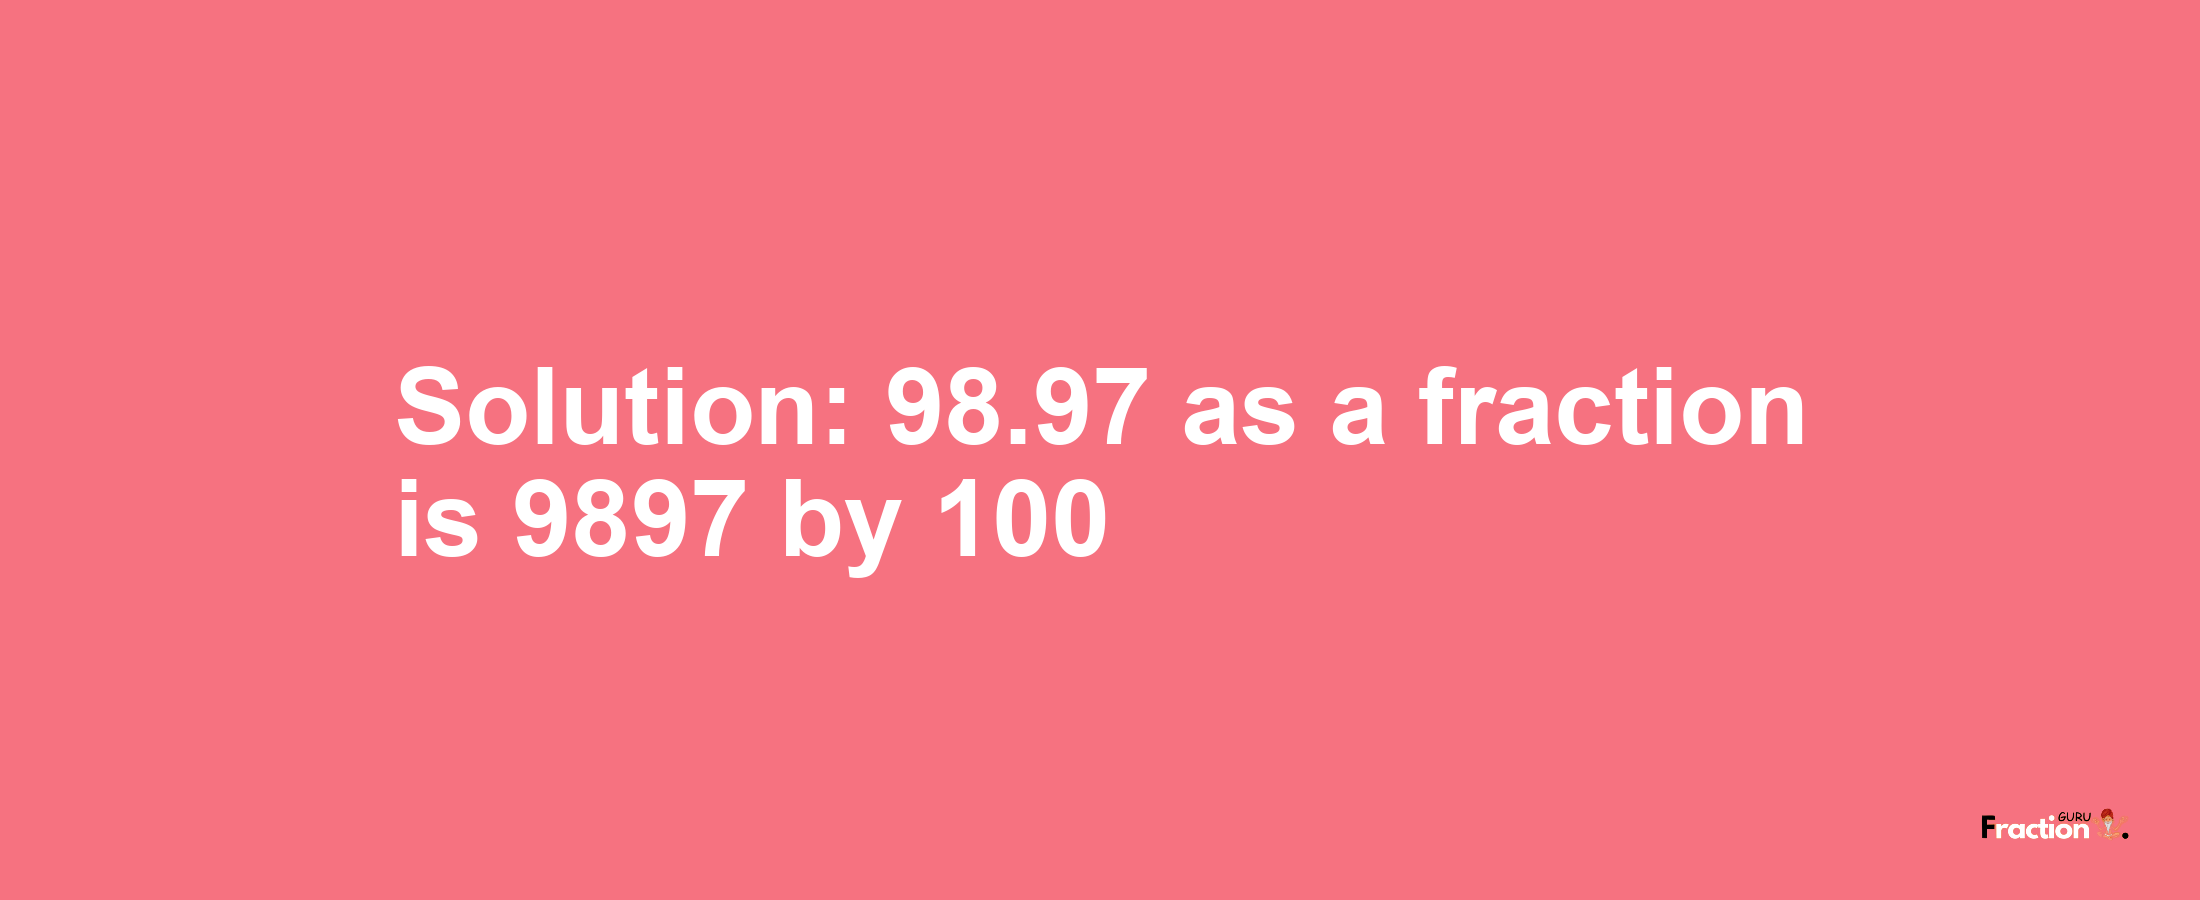 Solution:98.97 as a fraction is 9897/100